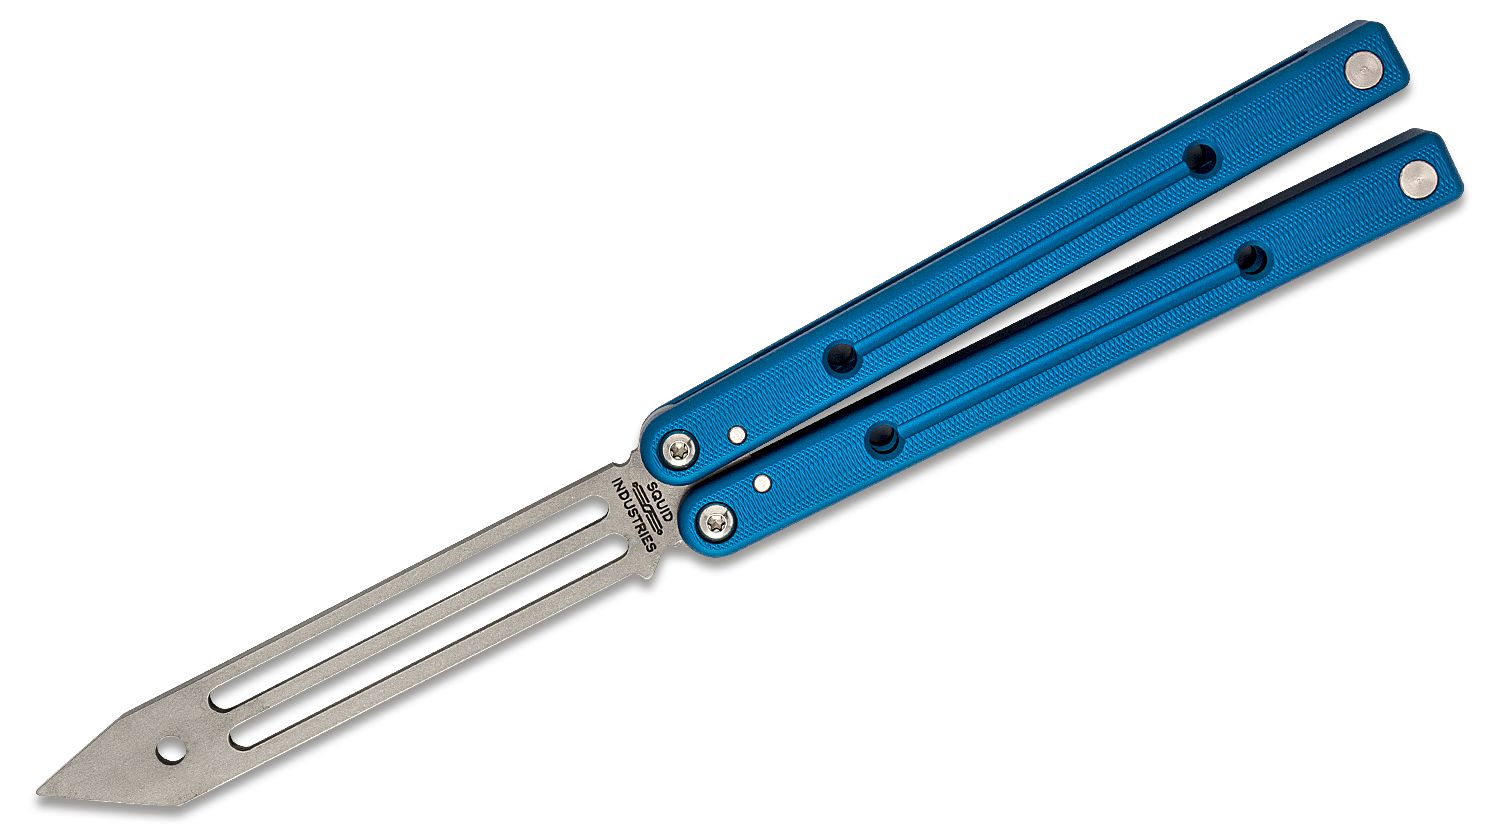 Squid Industries Squidtrainer V3.5 Balisong Butterfly Trainer 5.2 